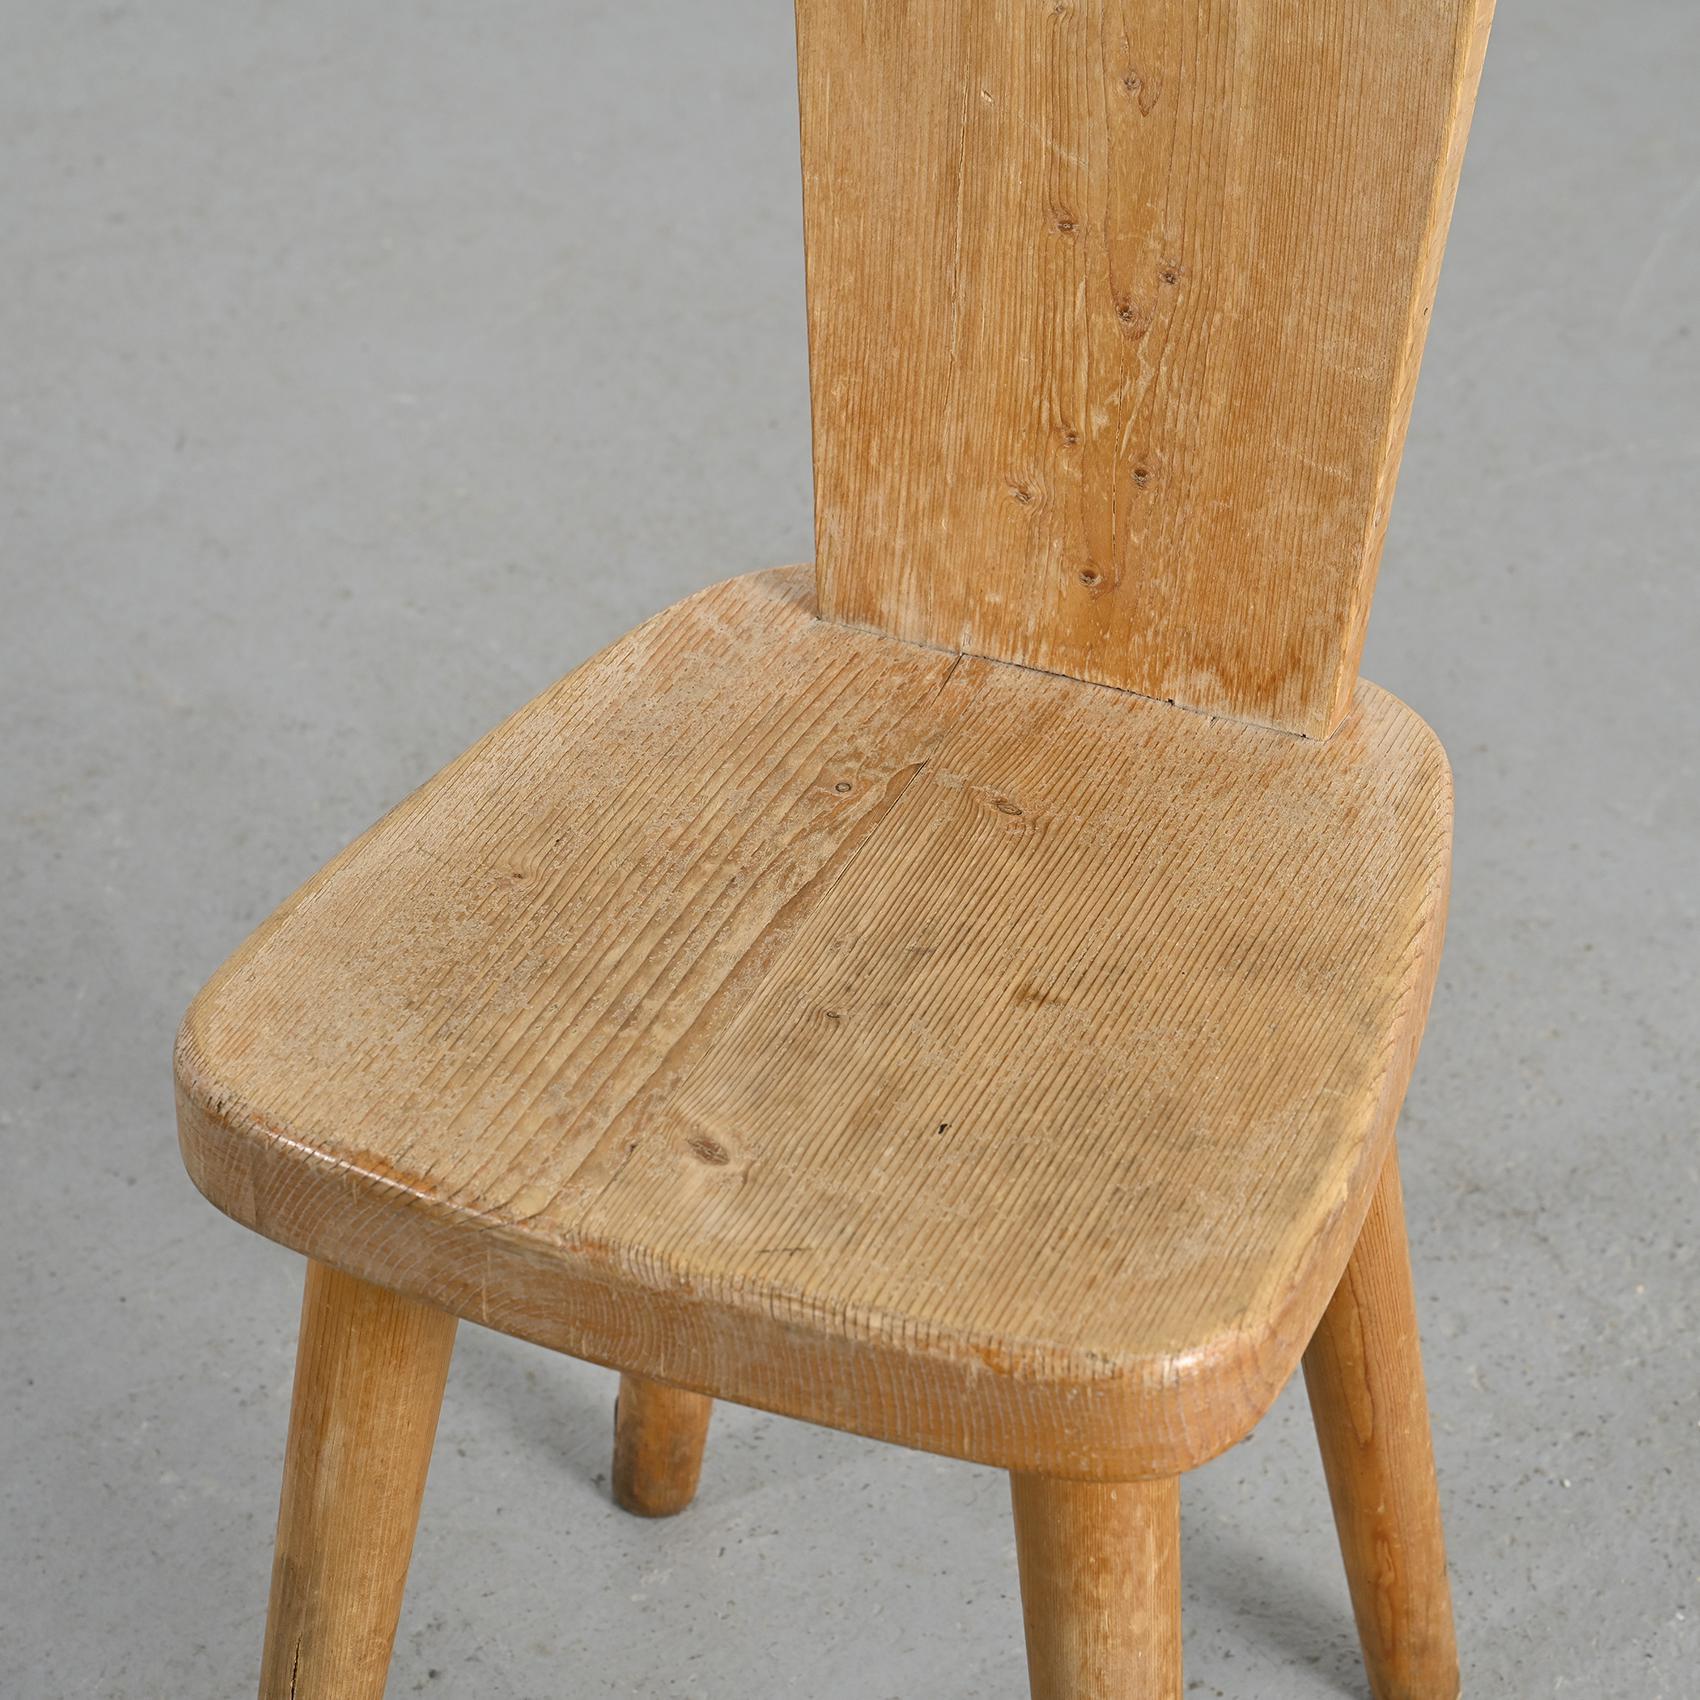 Solid Pine Chair by Christian Durupt, Meribel 1960 For Sale 3